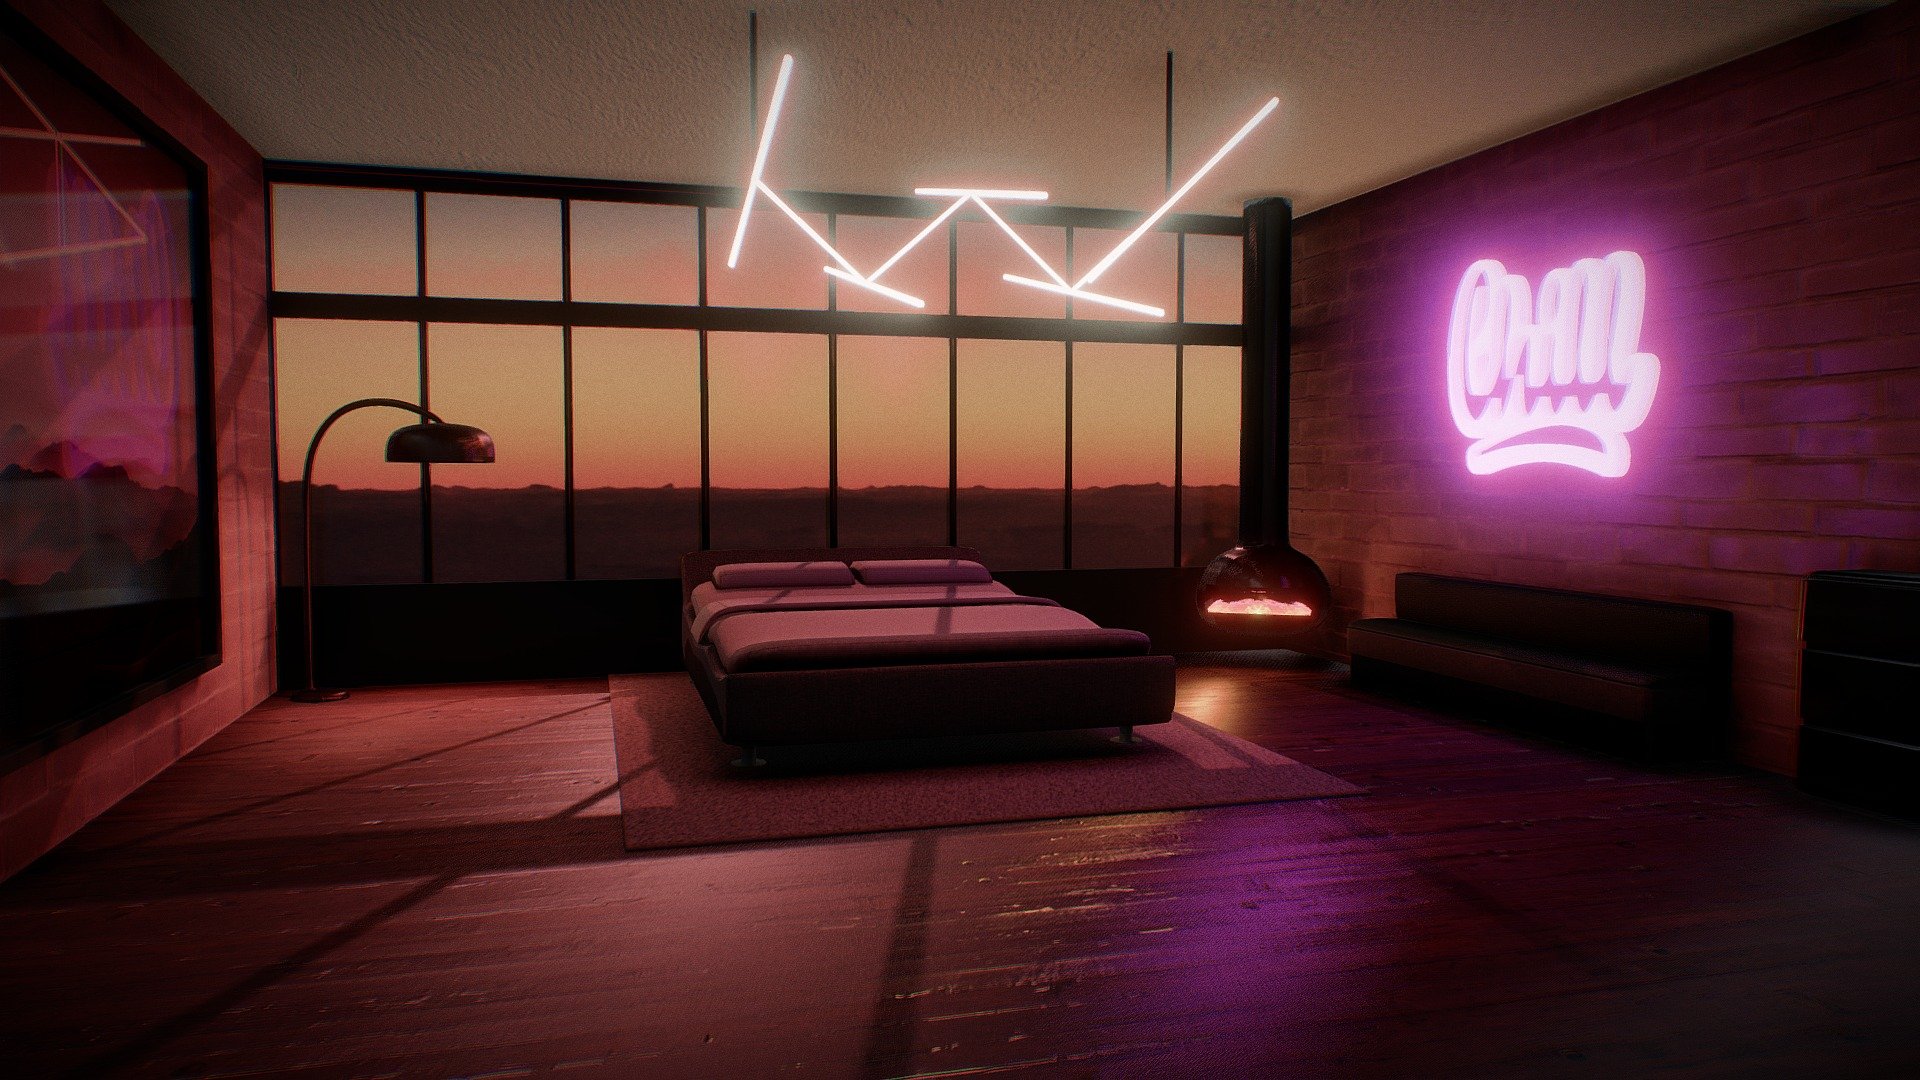 Aesthetic Modern Bedroom I made in my spare time, which I really enjoyed making. Most of the textures are baked 3d model